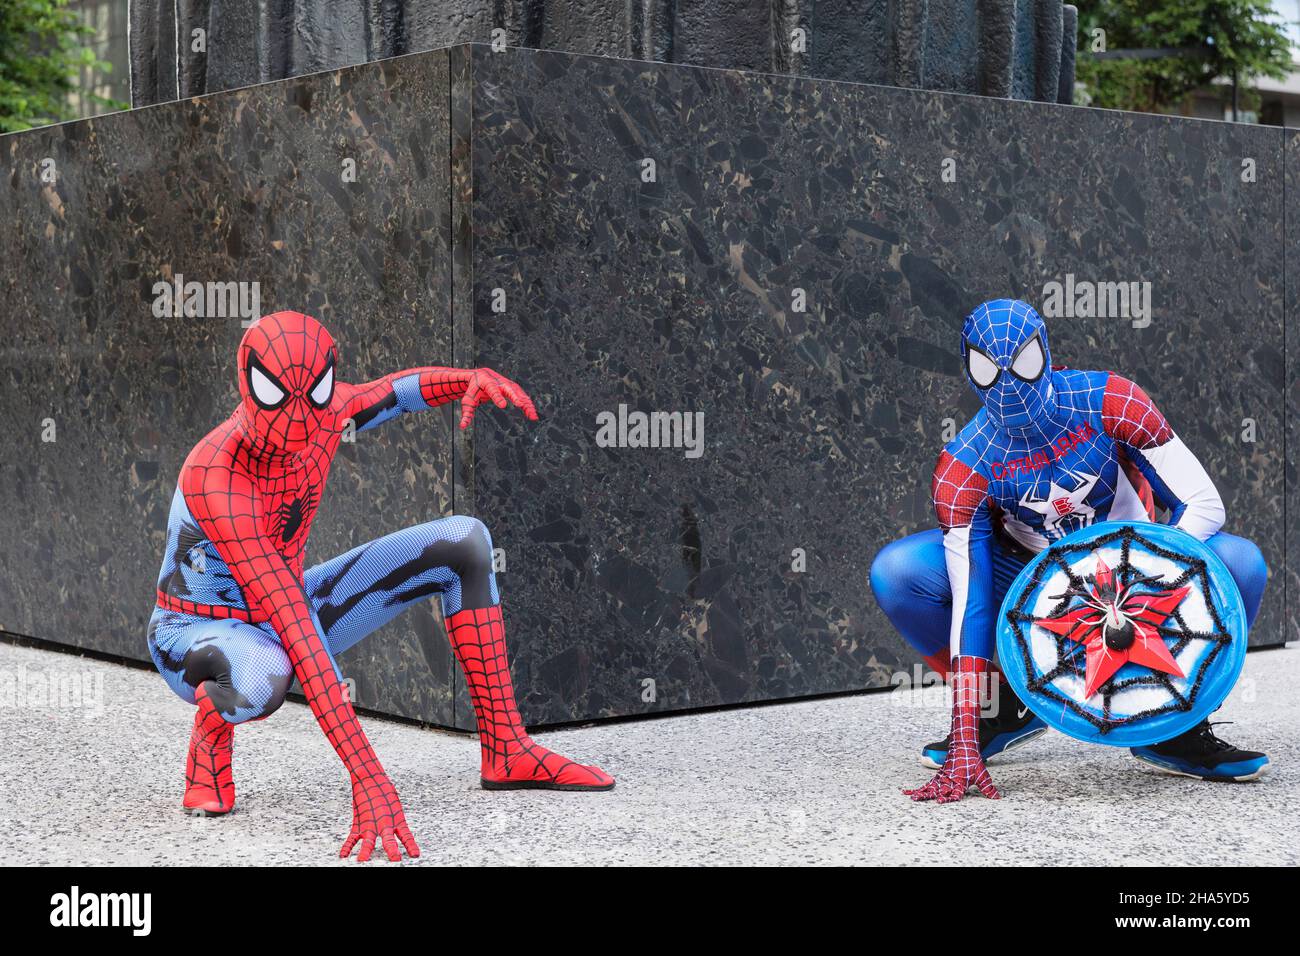 Spiderman Costumes for sale in Paris, France